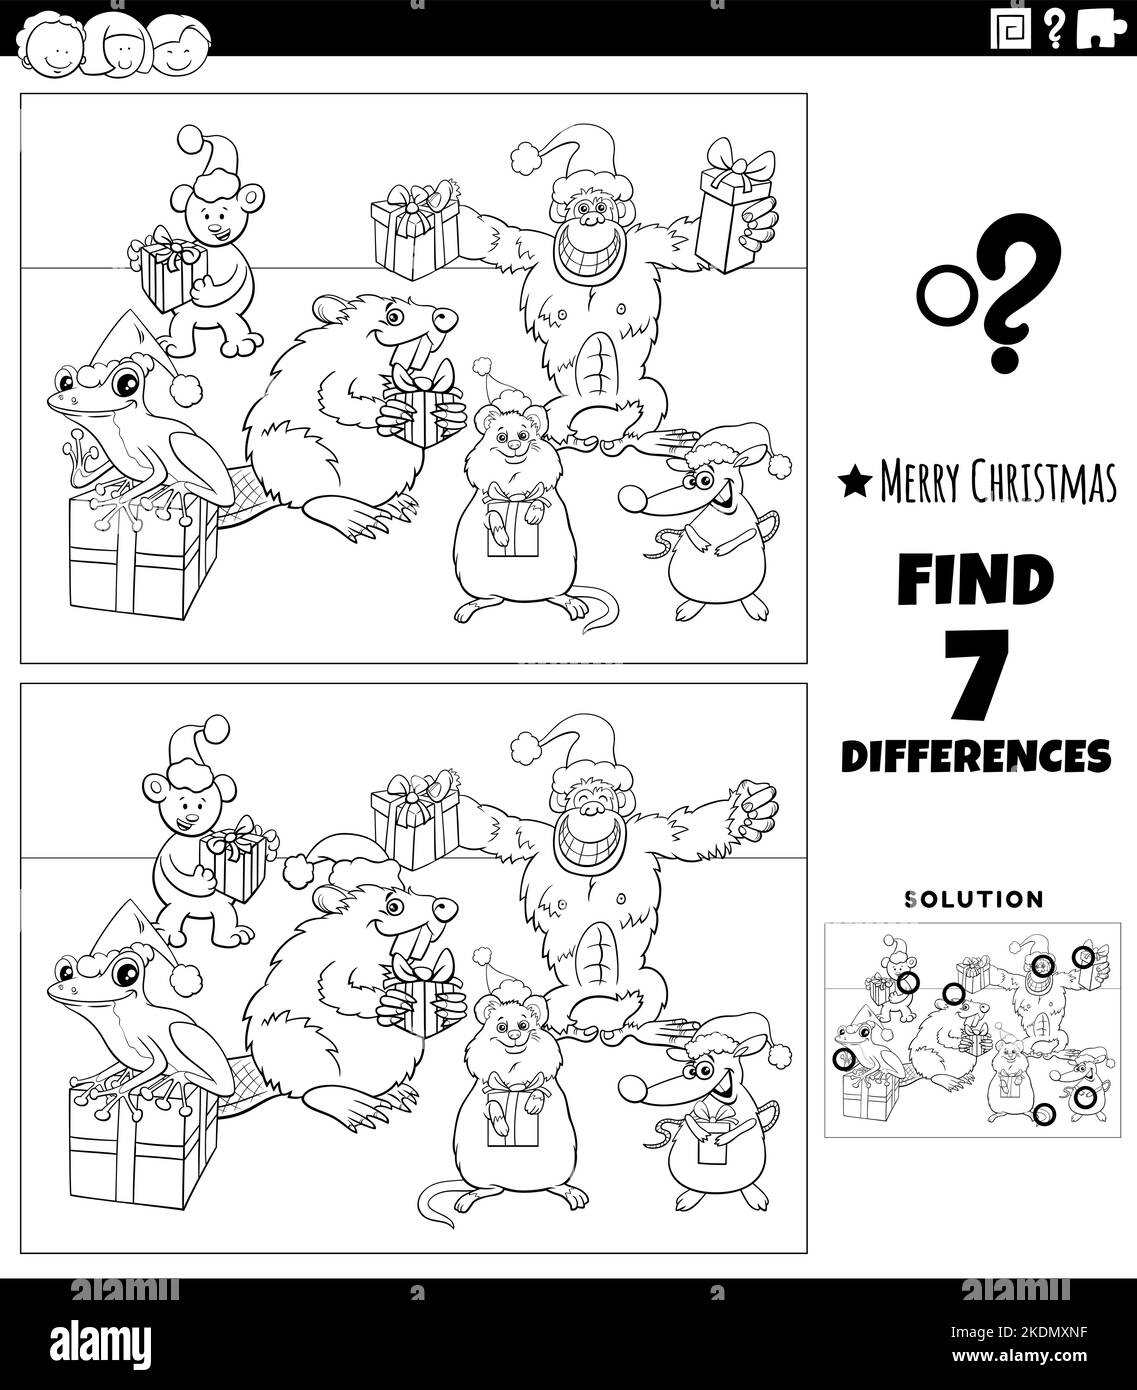 Black and white cartoon illustration of finding differences between pictures educational game for children with funny animal characters on Christmas t Stock Vector